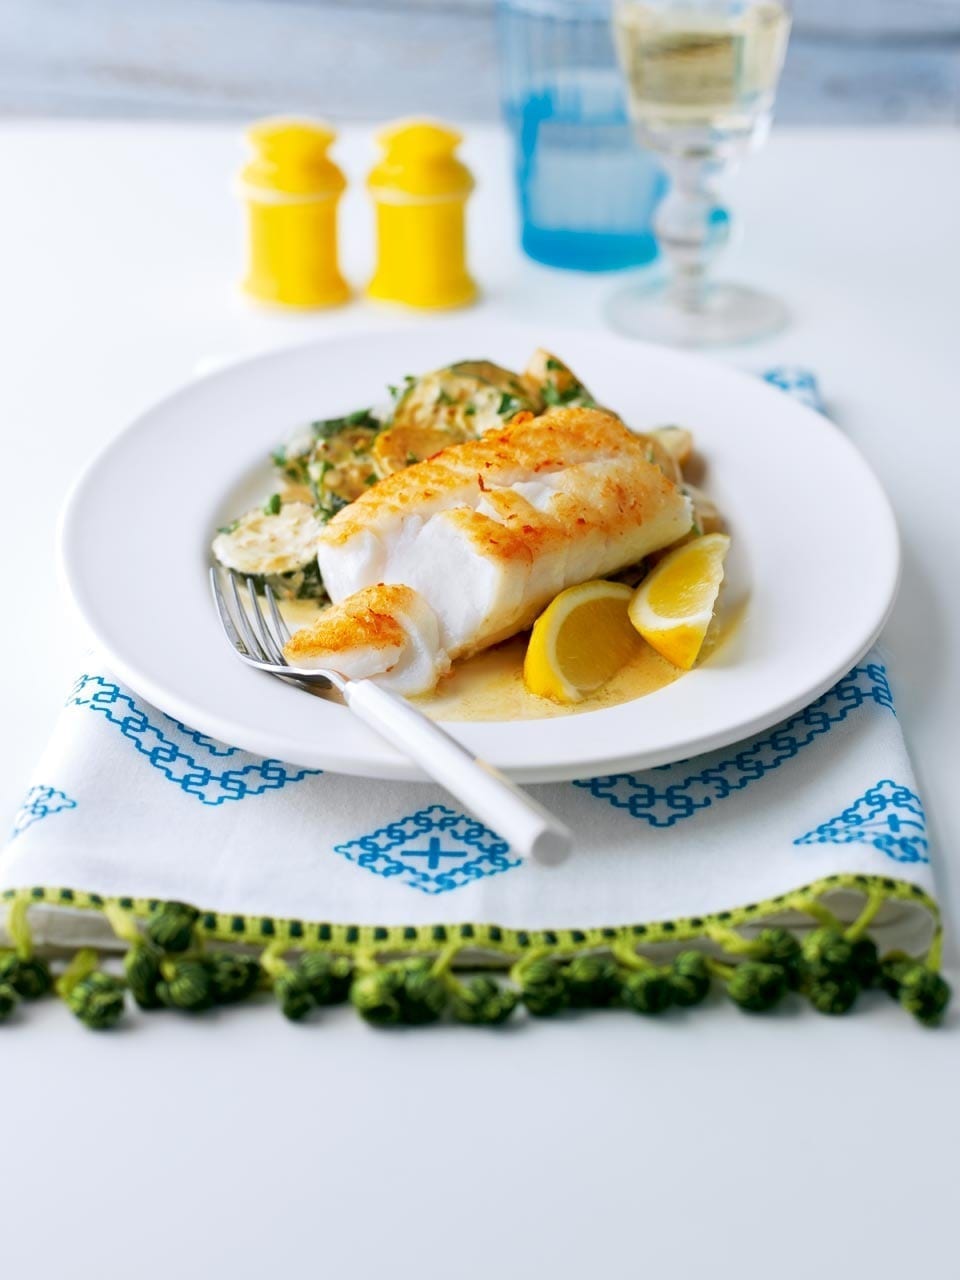 Pan-fried cod with creamy new potatoes and courgettes recipe ...